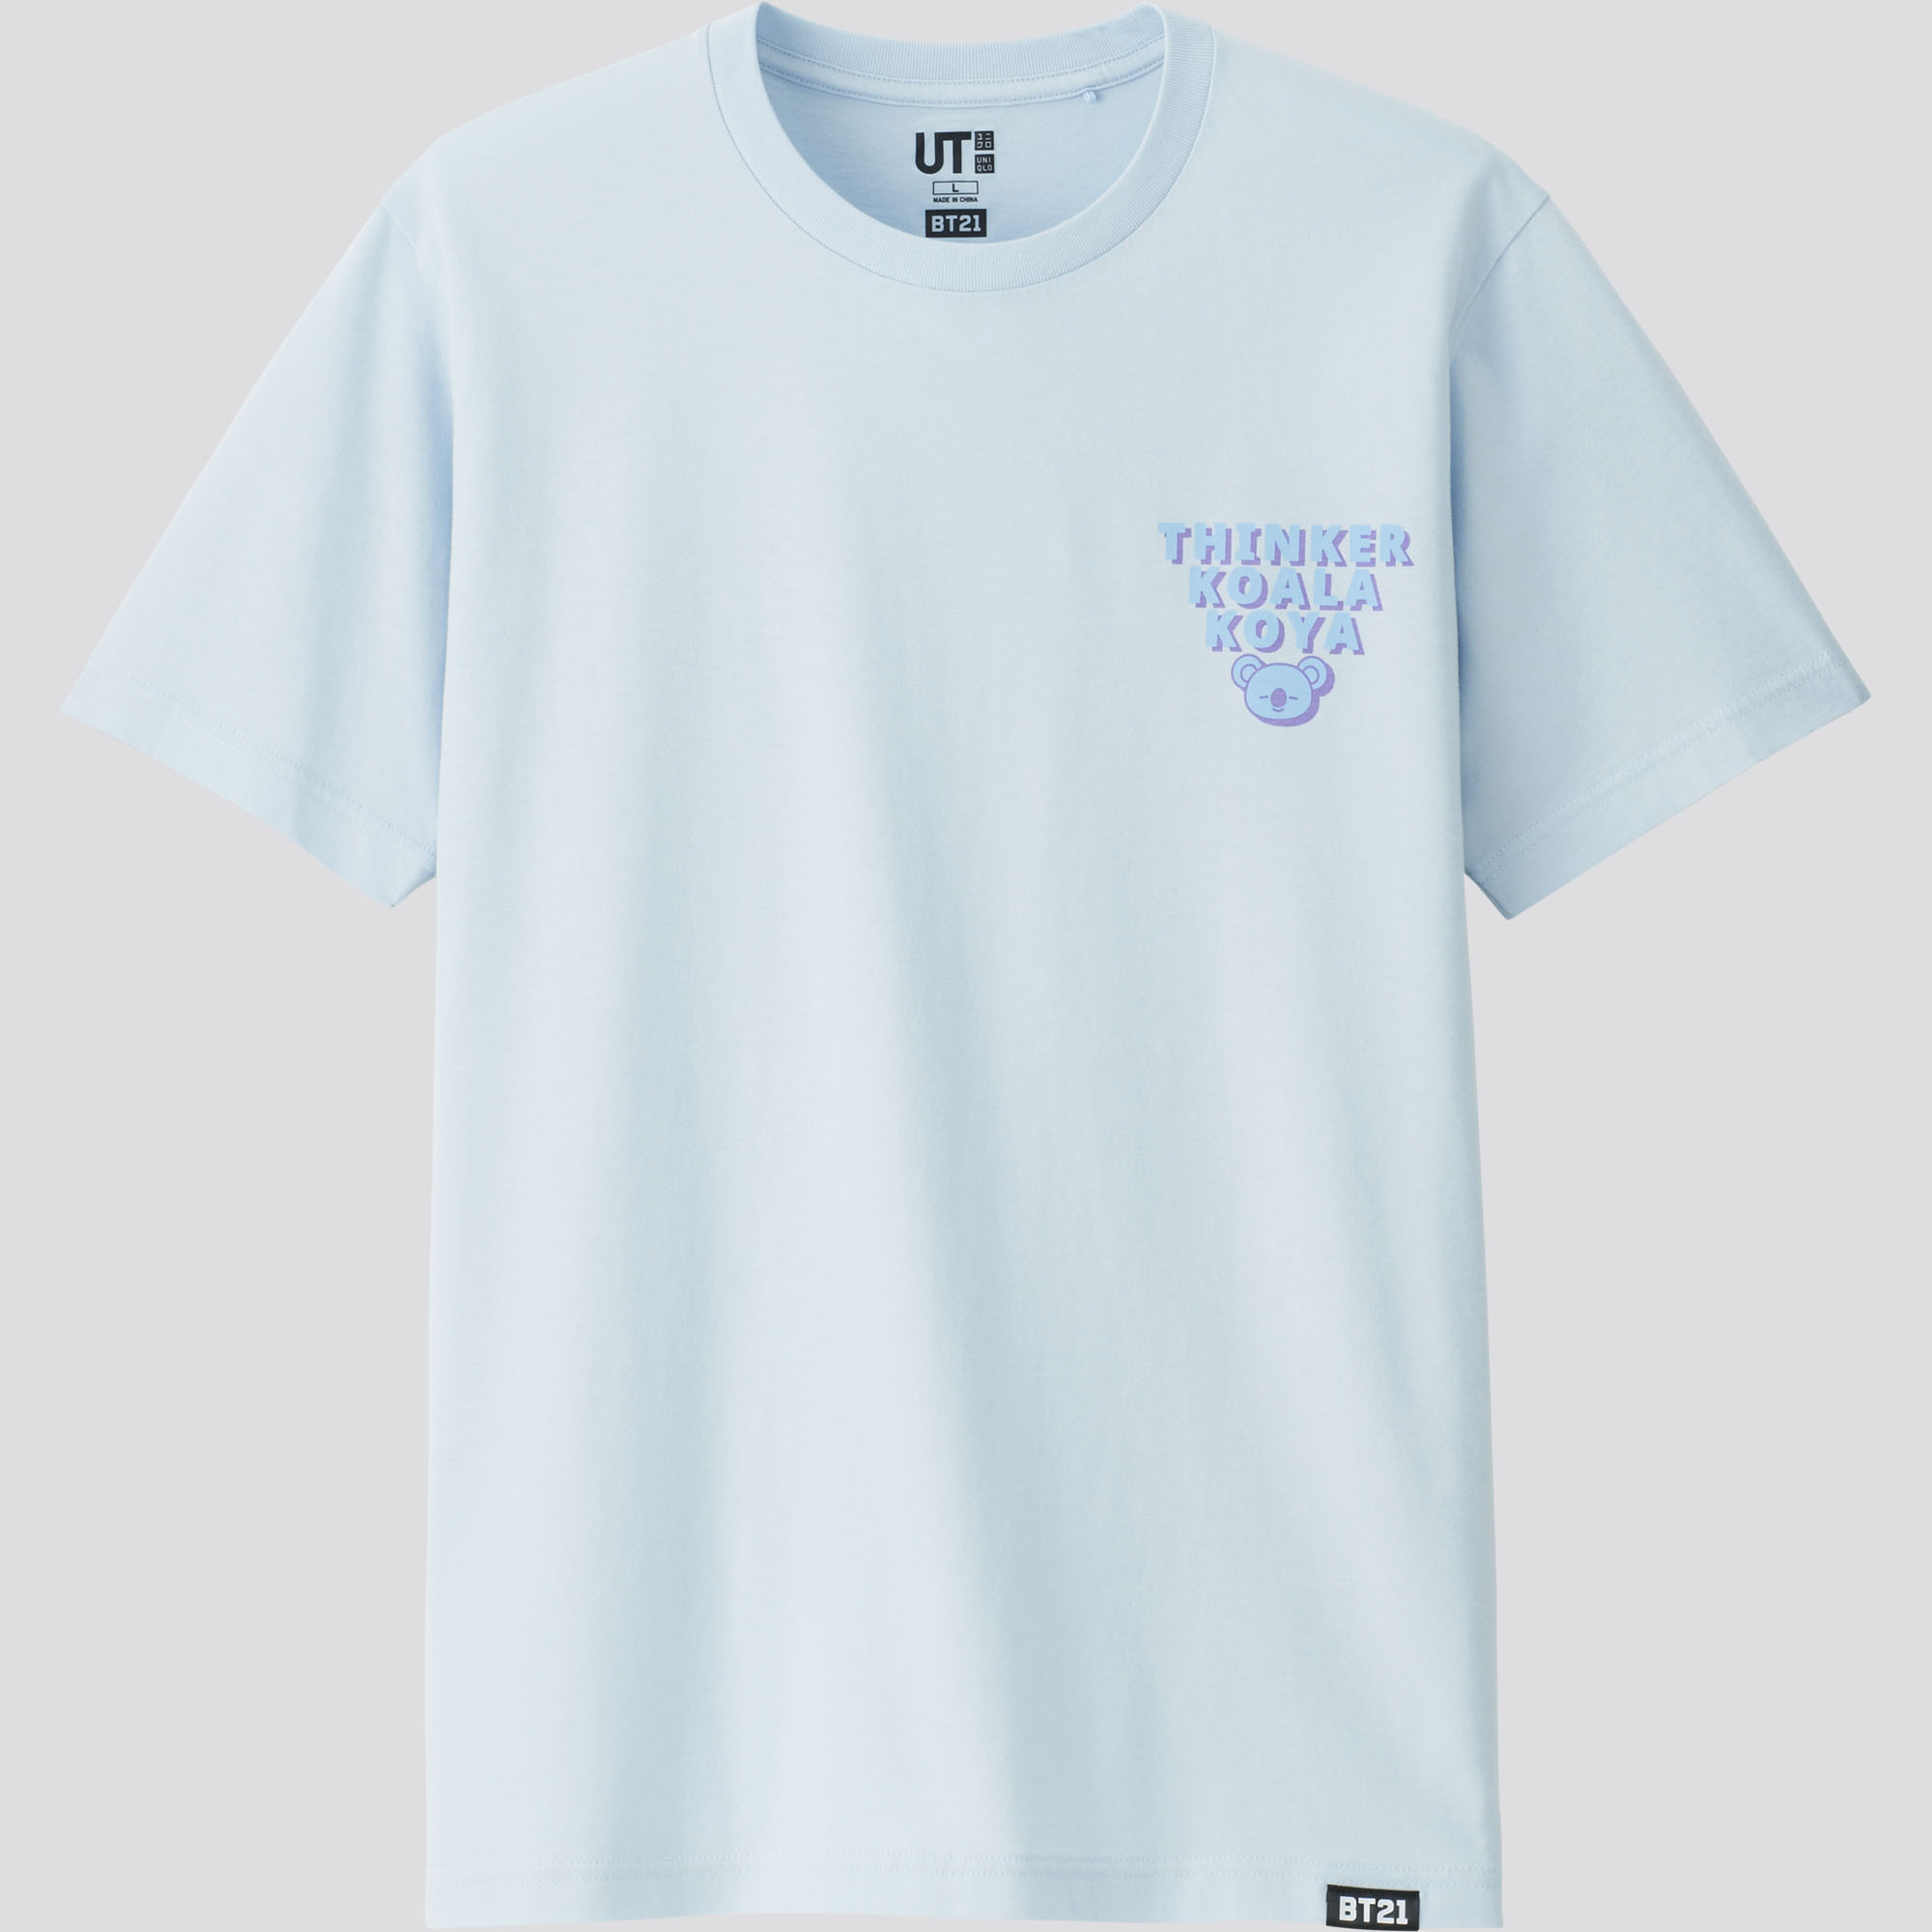 Uniqlo t-shirts with 11 BT21 designs selling at S$14.90 in S'pore from ...